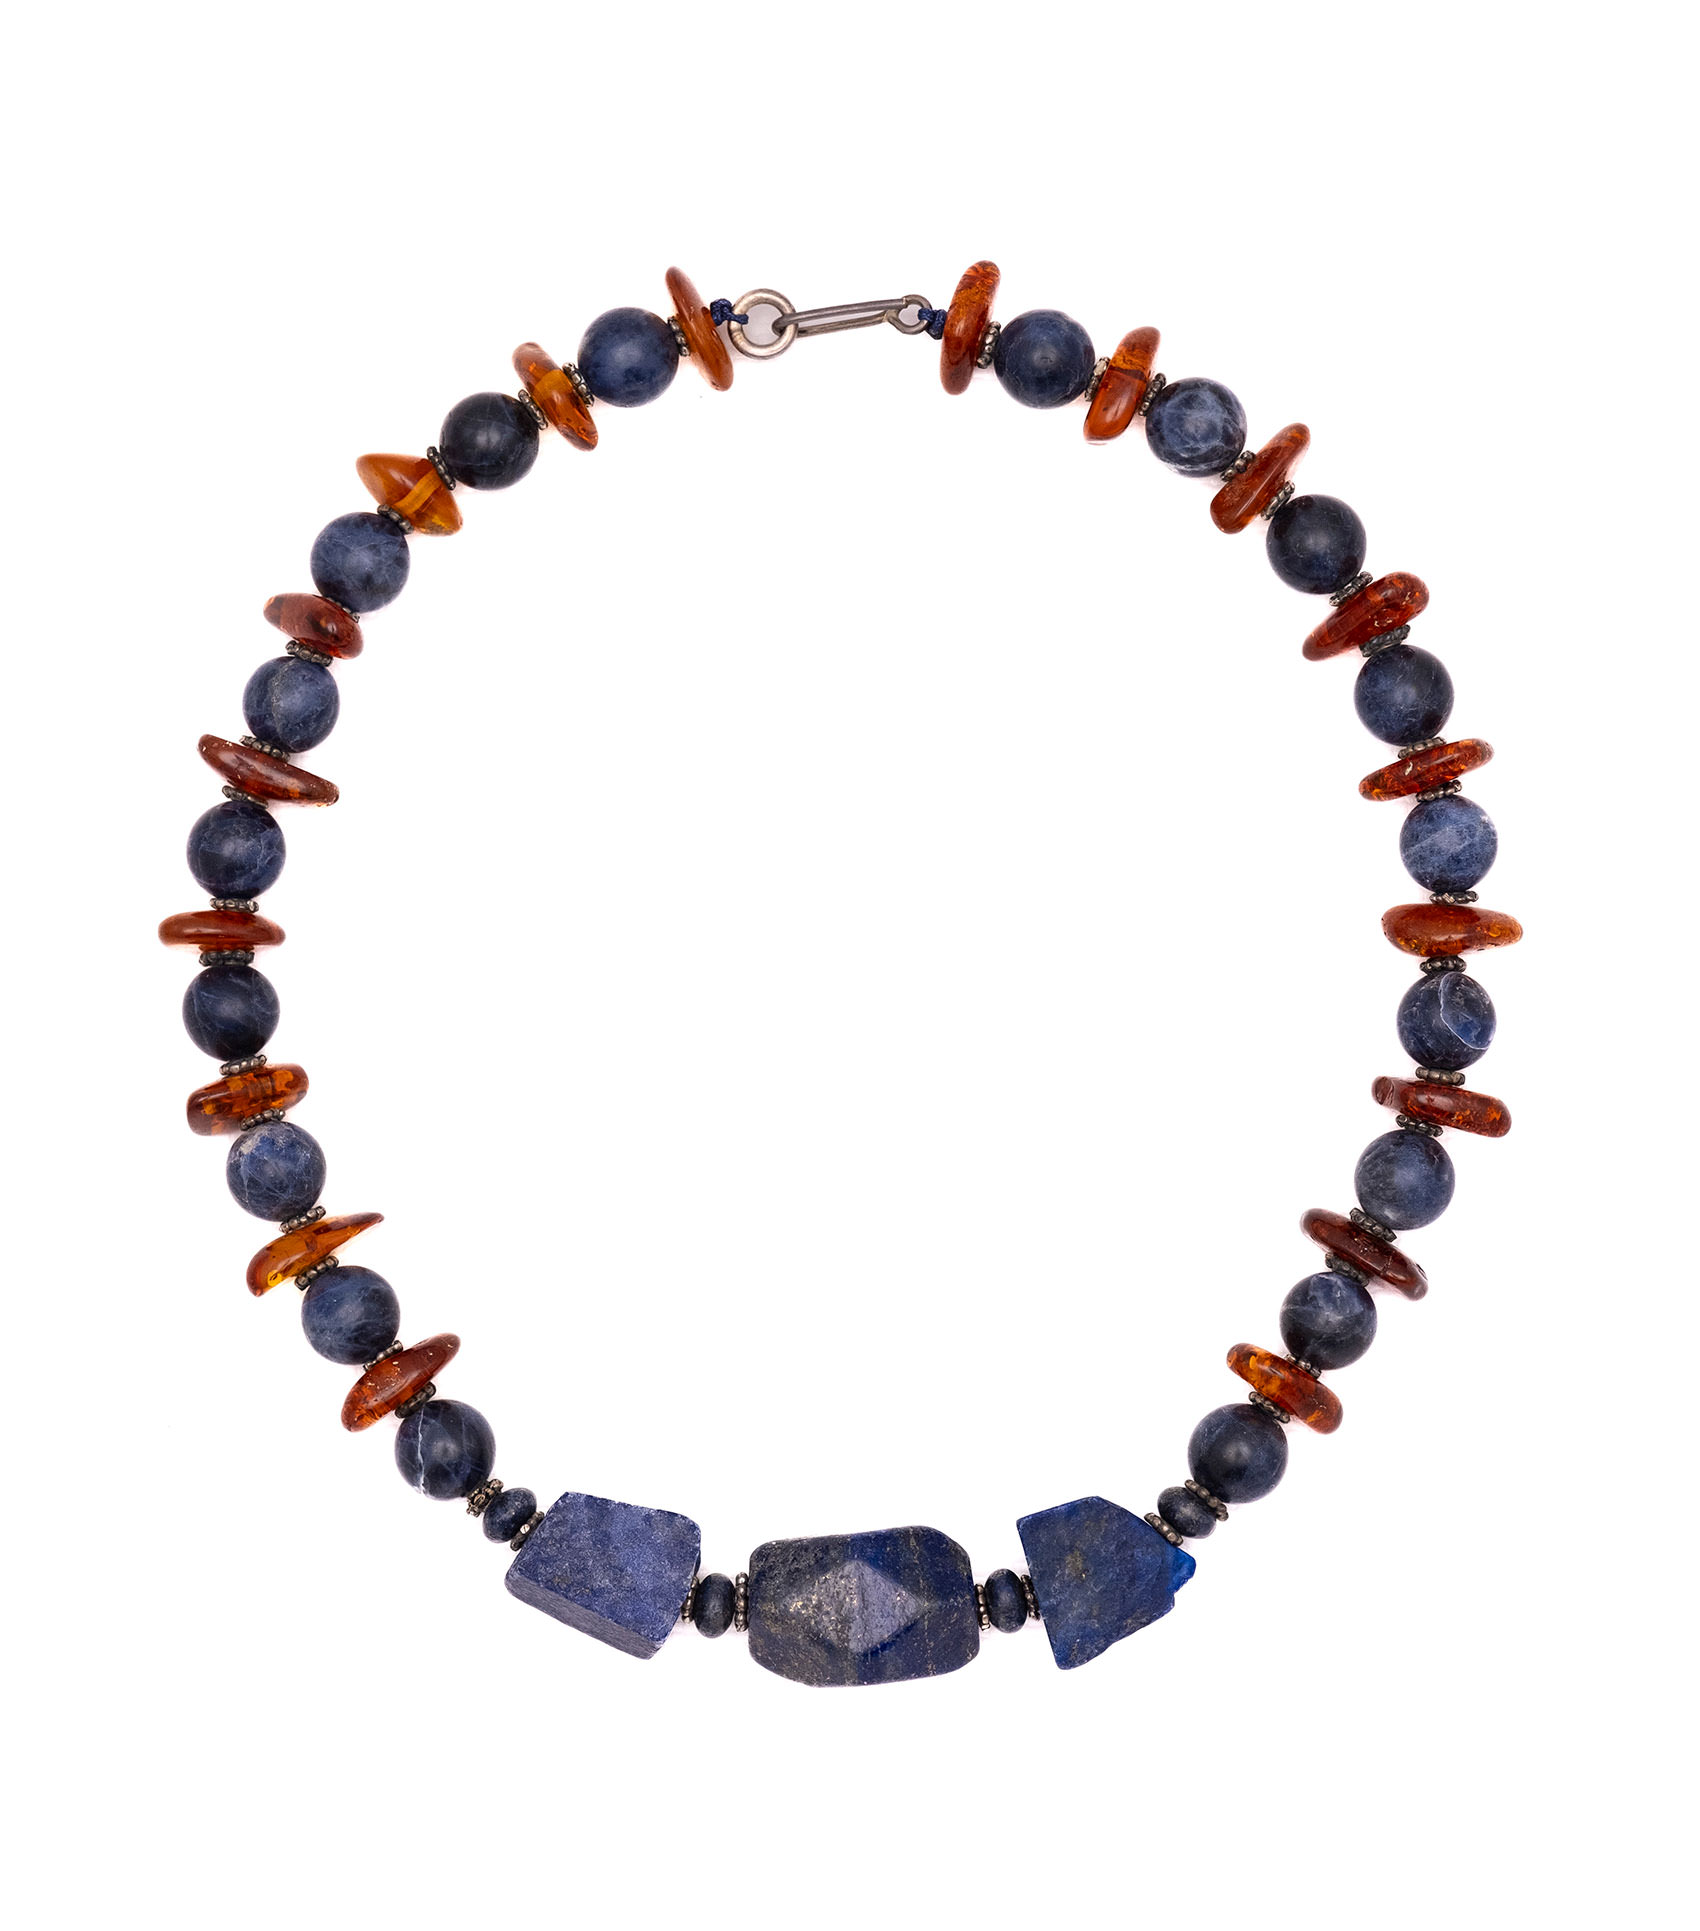 Necklace made of agate, genuine amber from Baltic sea - cut by hand and silver.